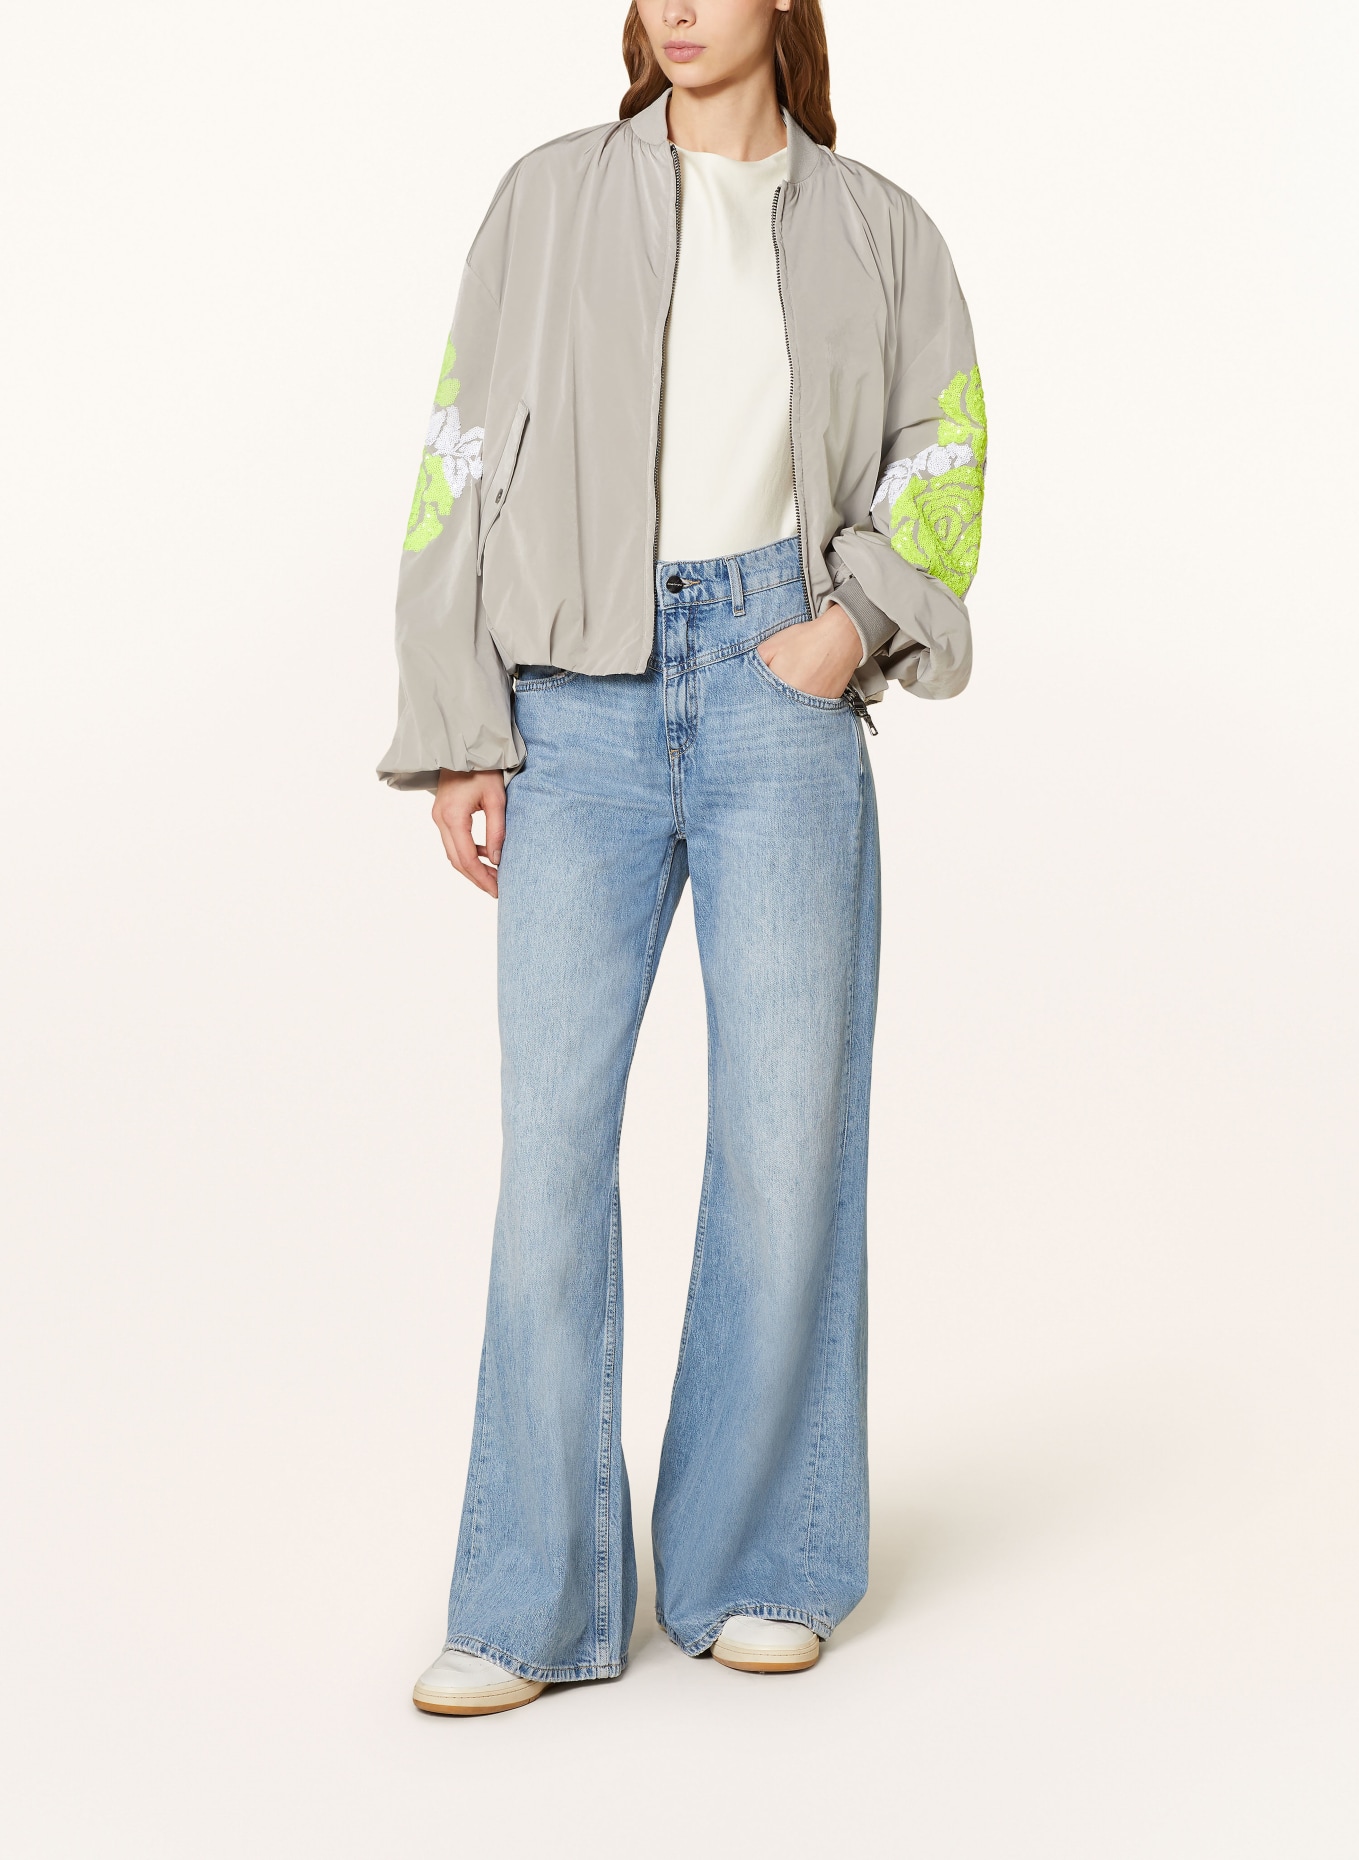 BLONDE No.8 Bomber jacket LIVERPOOL with sequins, Color: TAUPE (Image 2)